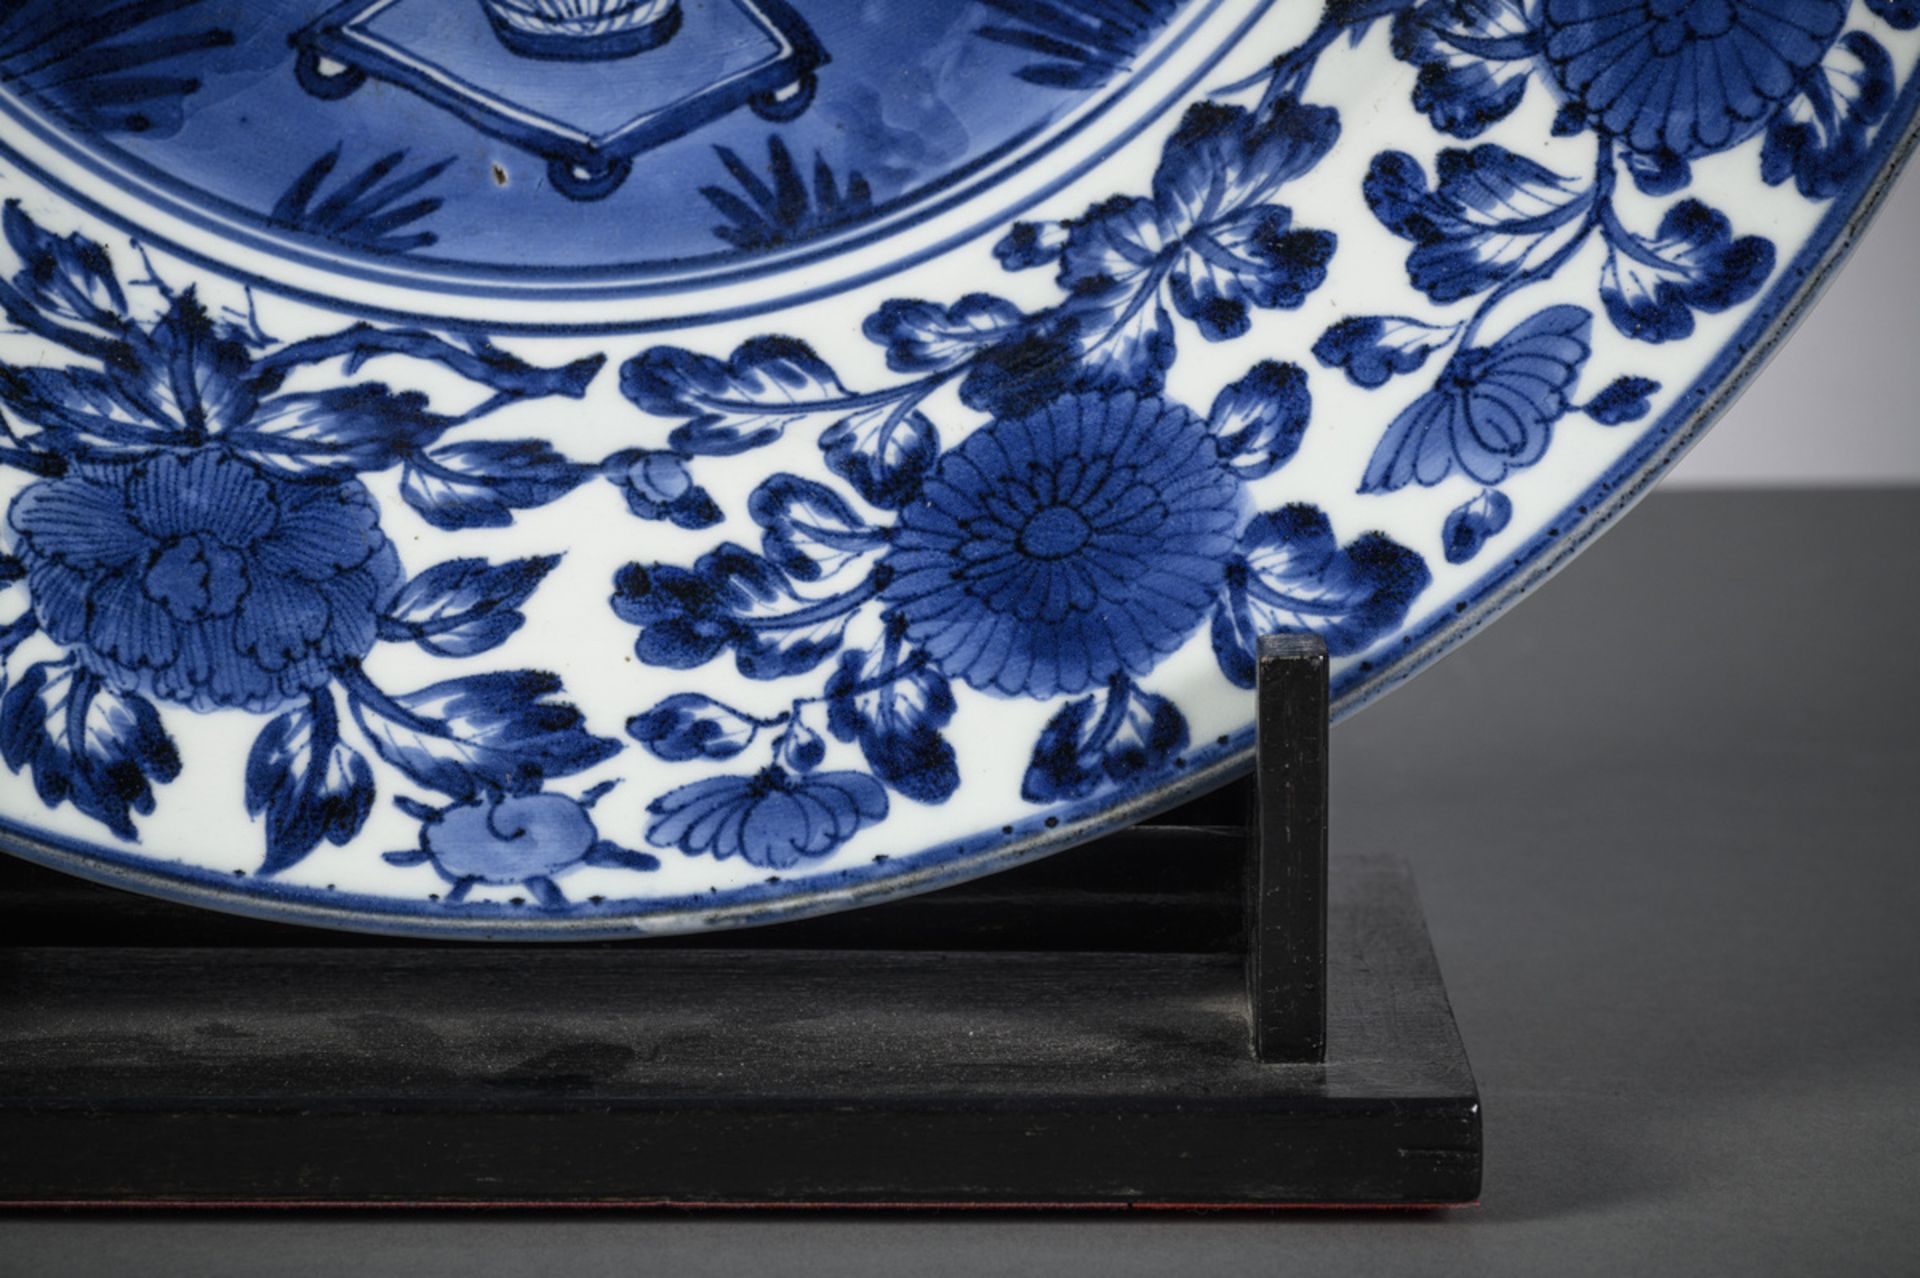 Exceptionally large dish in Japanese Arita porcelain, 17th/18th century (dia 55cm) - Image 5 of 5